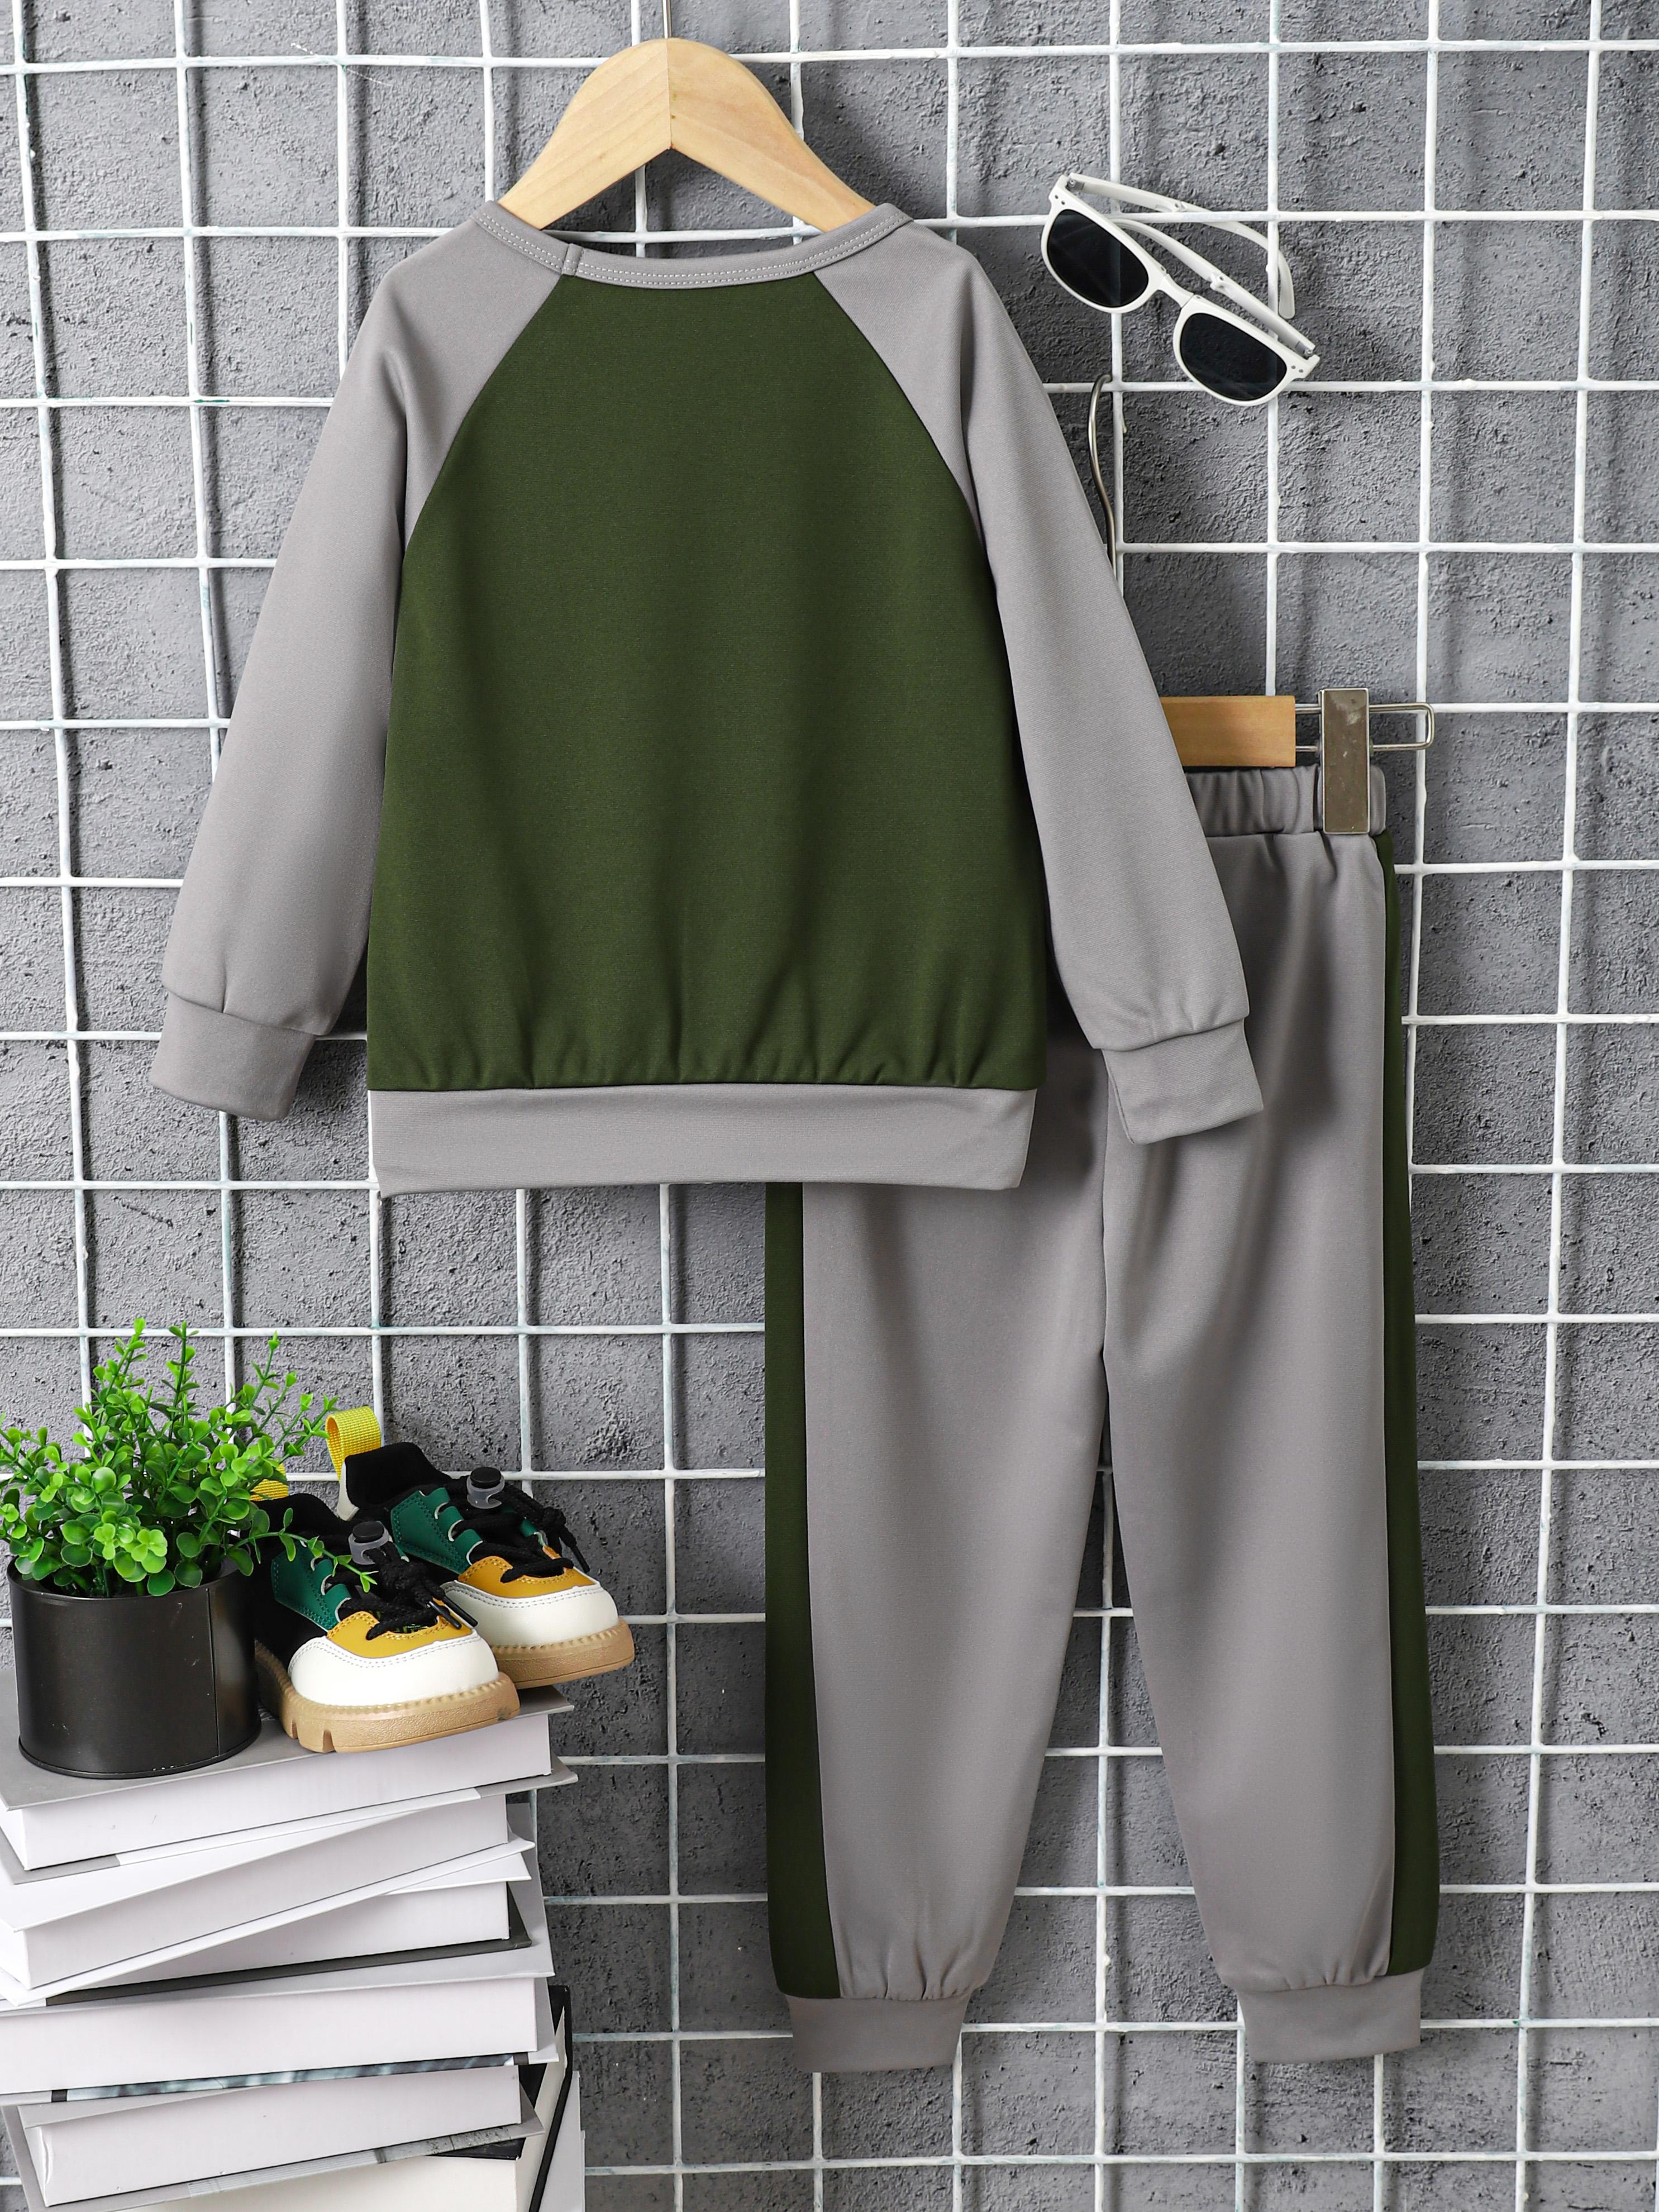 3-8Y Ready Stock Baby Boys Fall Winter Outfits Pants Set Letter Graphics Color Block Round Neckline Tops Elastic Pants 2Pcs Casual Clothing From 3y-8y Gray Catpapa 462307152